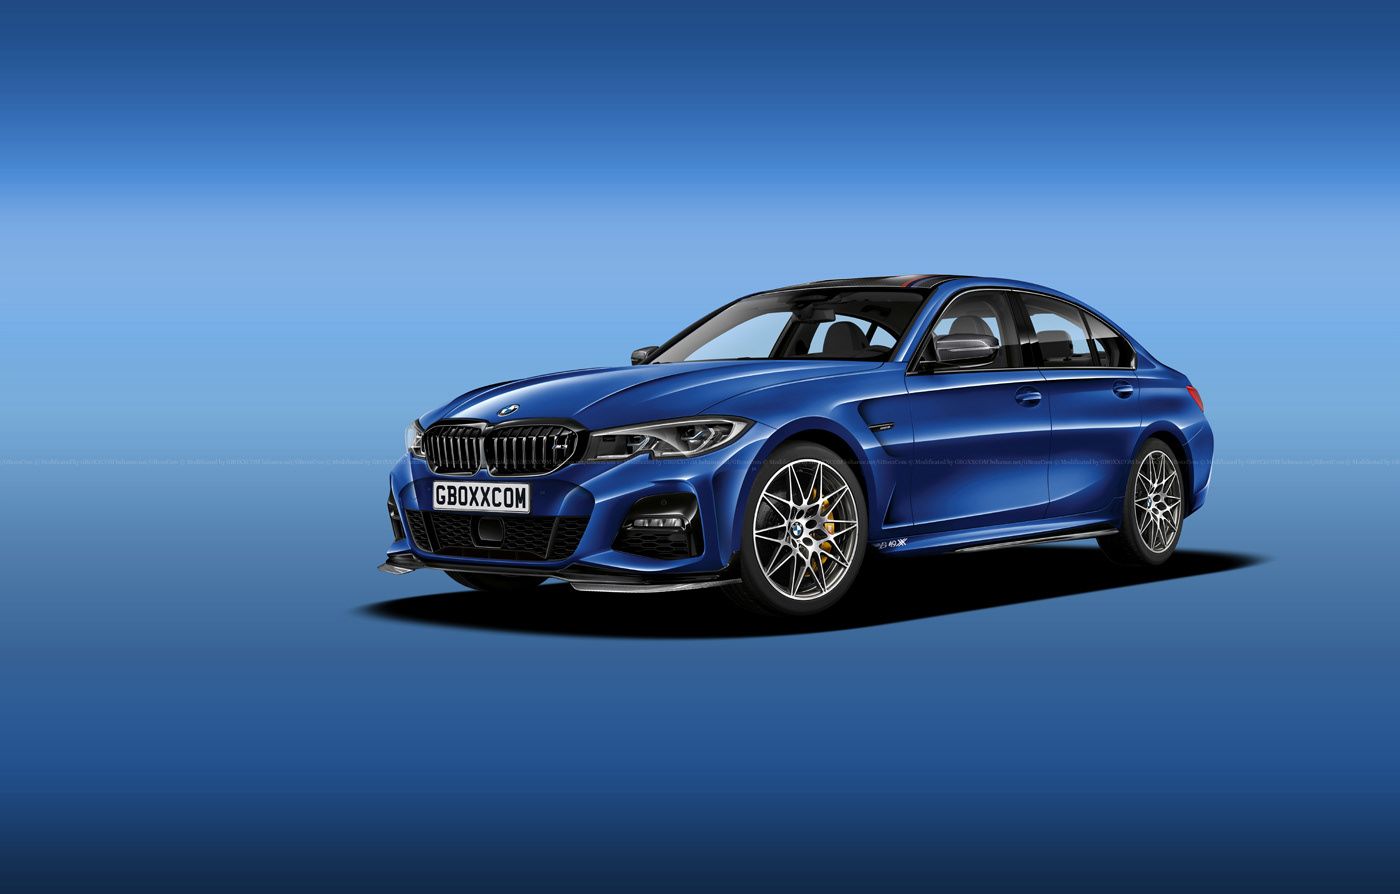 2019 It Won't Get Any Better than the 2020 BMW M3 Pure with Rear-Wheel Drive and Lots of Ponies